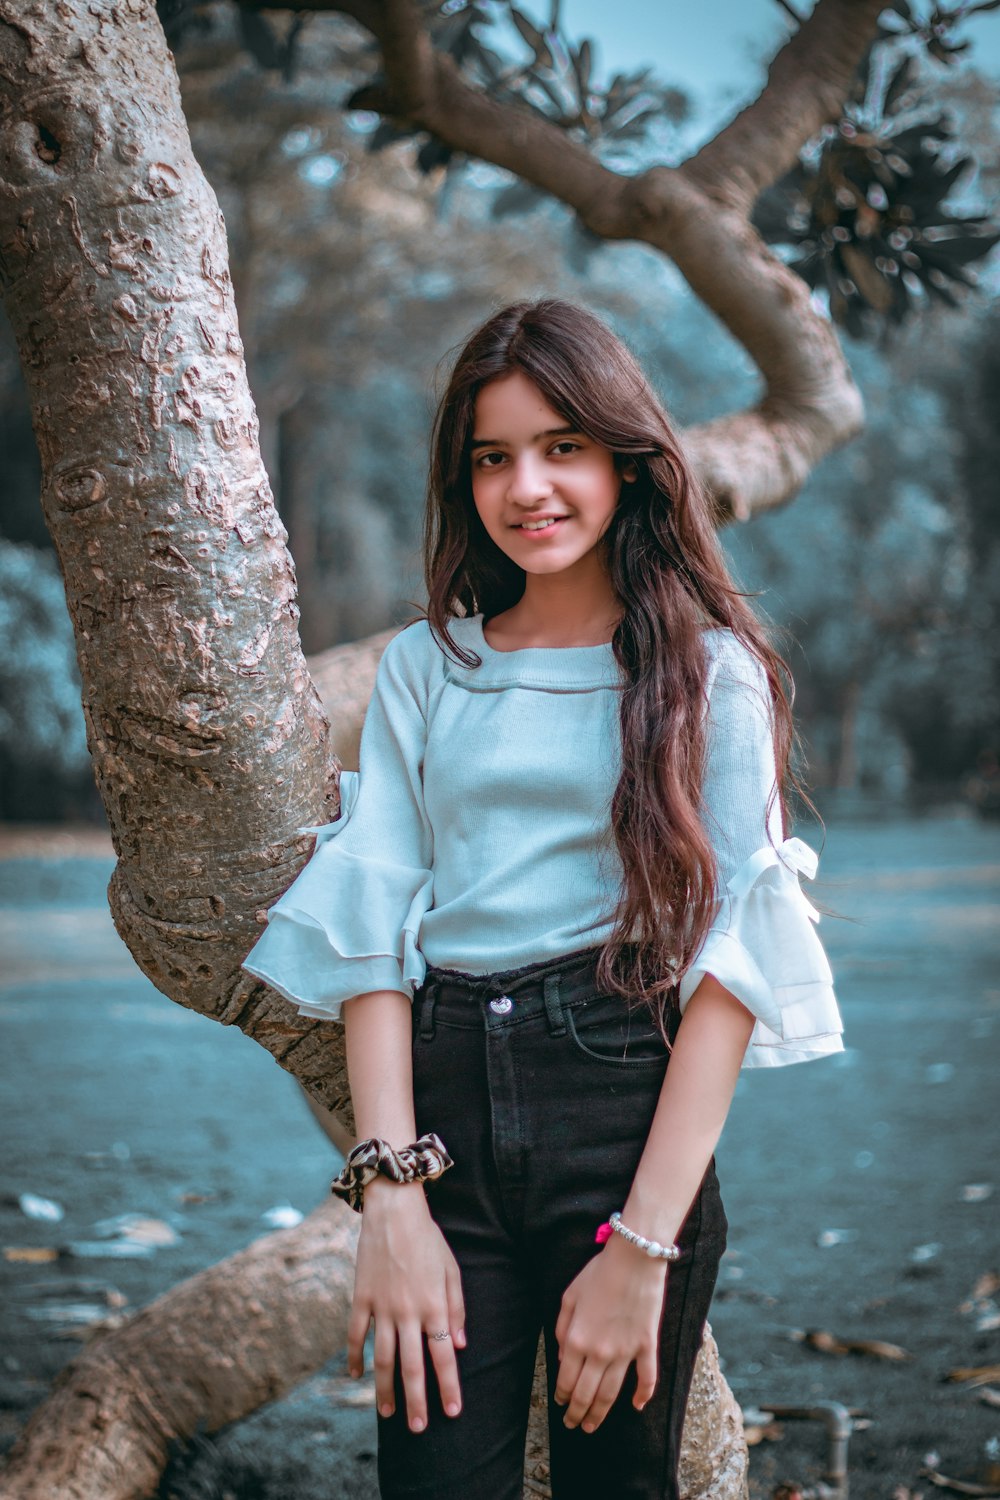 Best 500+ Indian Girl Photos [HD] | Download Free Professional Images on  Unsplash